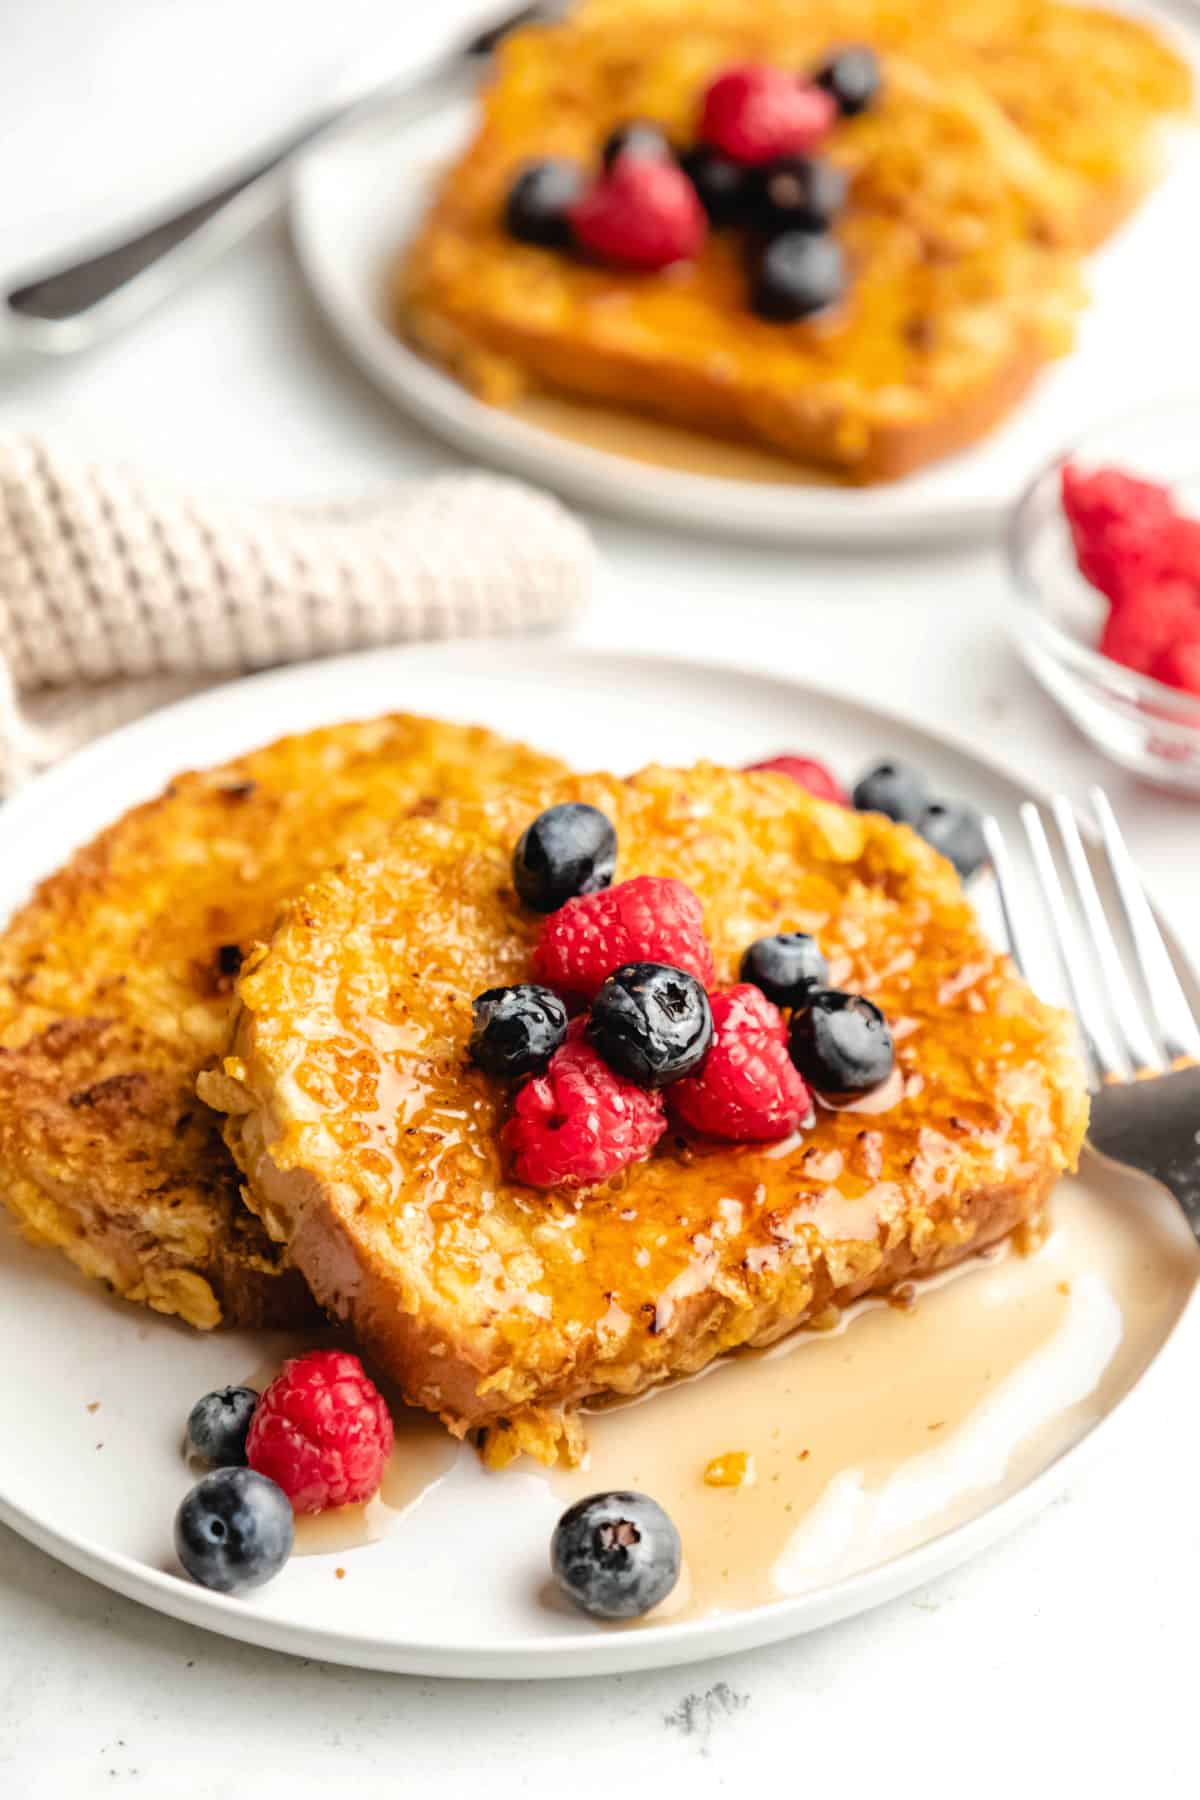 Two pieces of cornflake French toast on a plate in front of another plate of French toast.